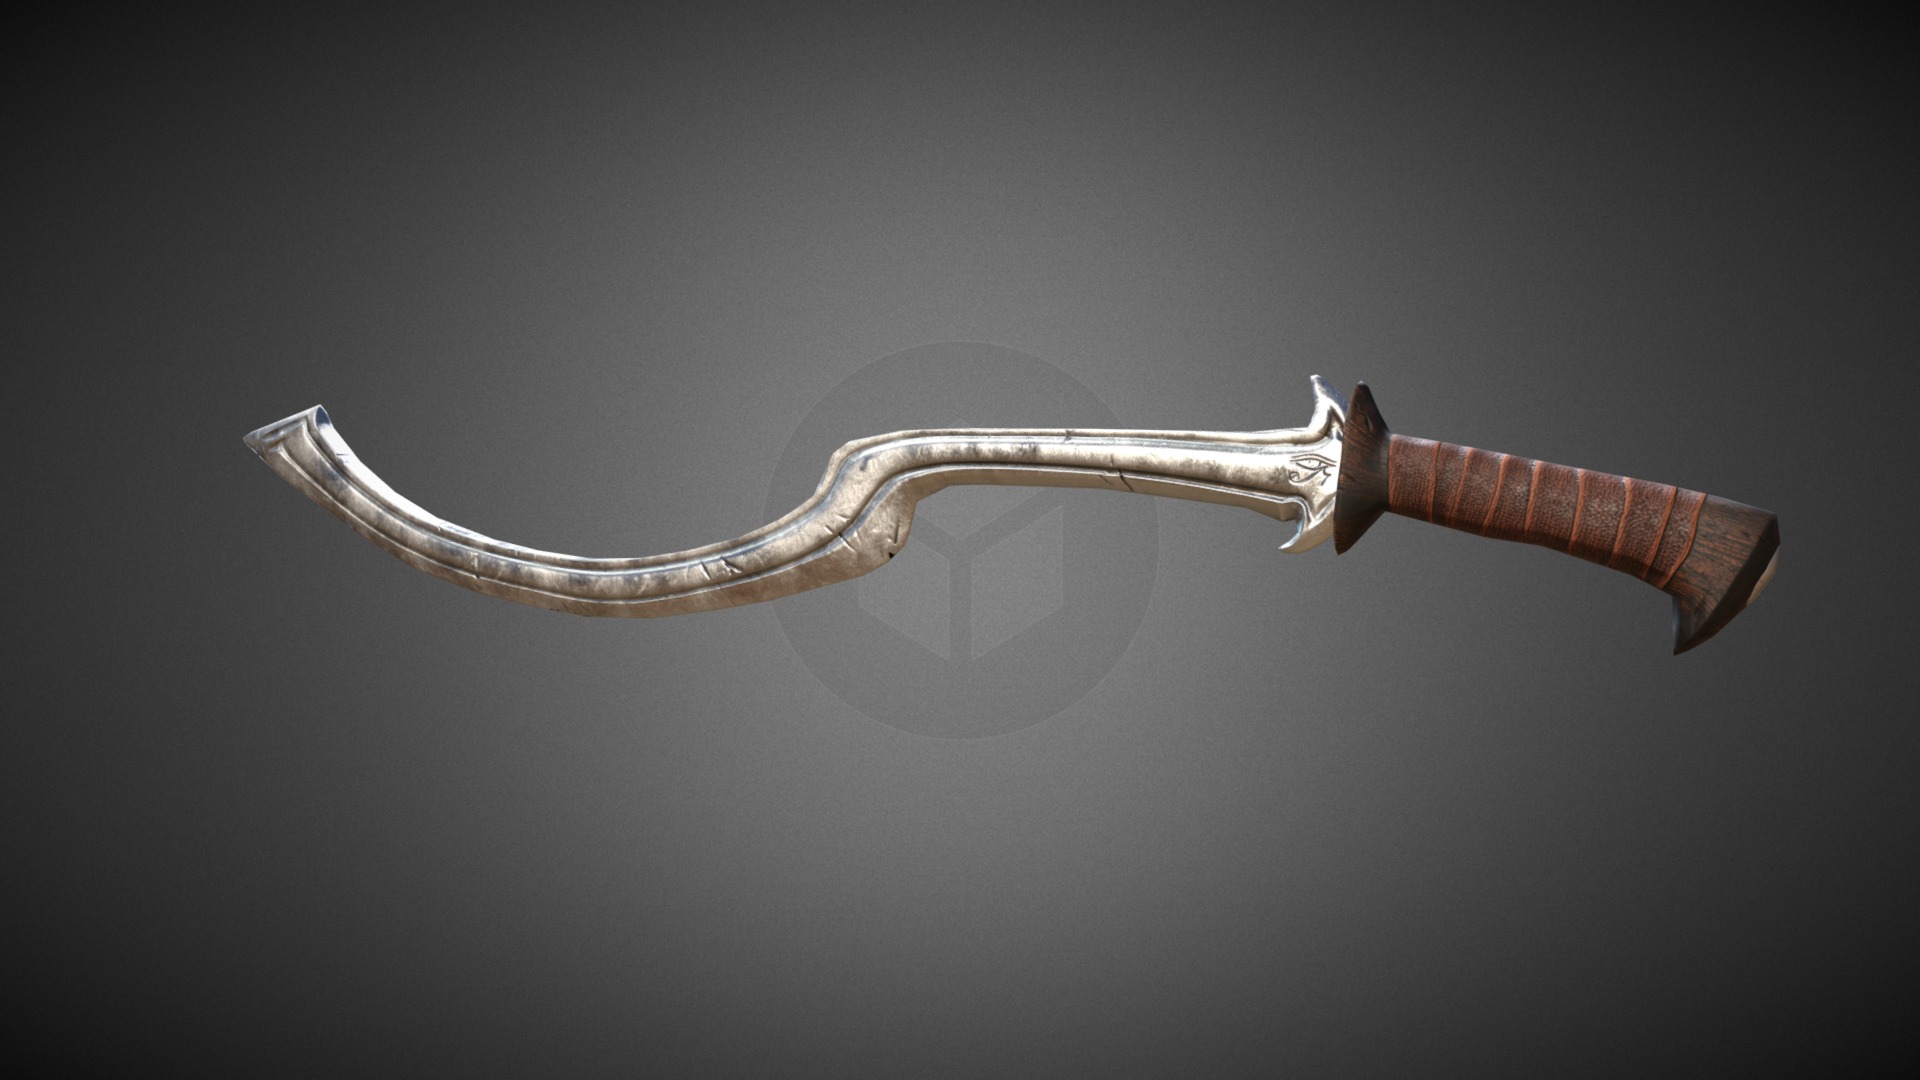 3D model Khopesh Sword - This is a 3D model of the Khopesh Sword. The 3D model is about a wooden spoon with a handle.